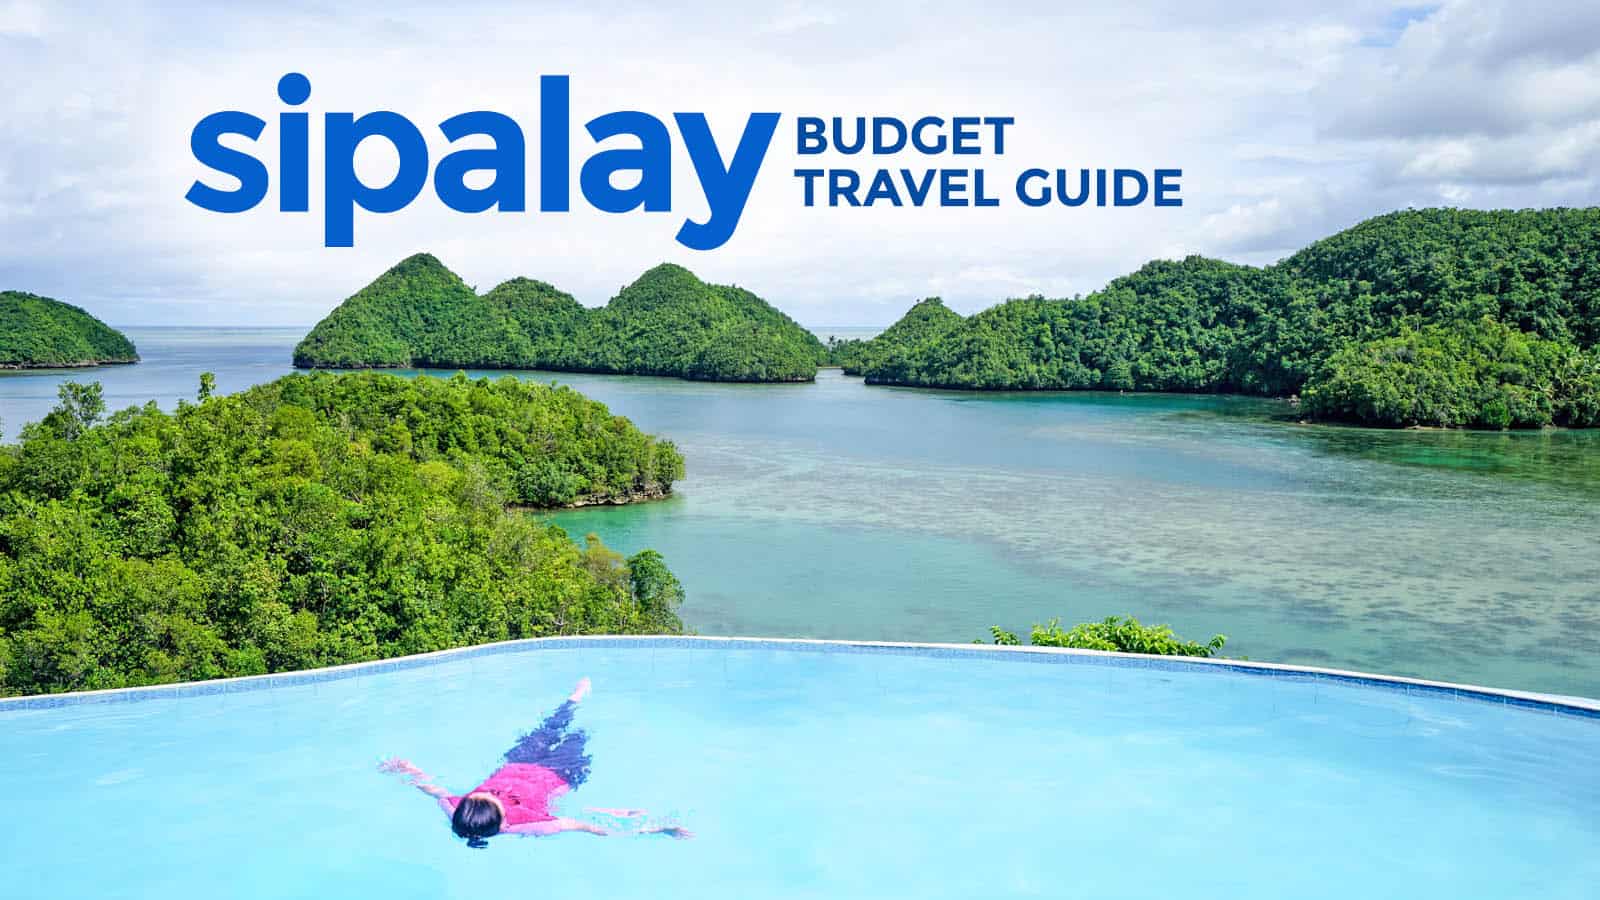 SIPALAY TRAVEL GUIDE with Budget Itinerary